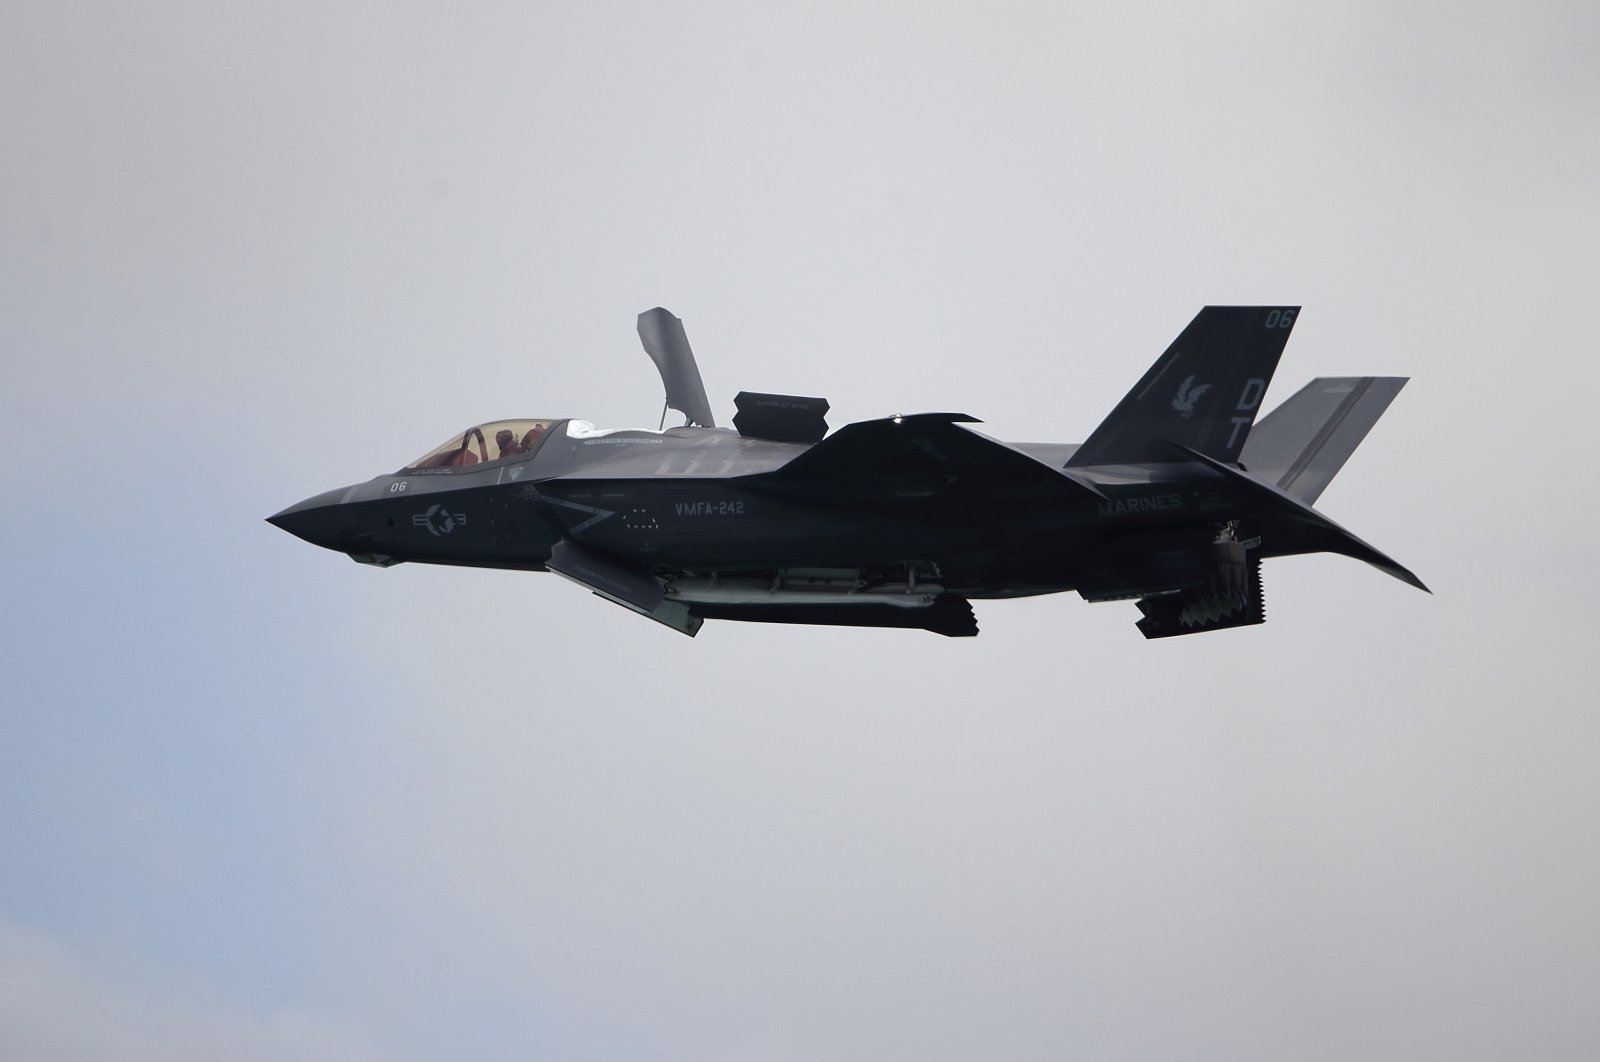 A U.S. Marine Corps F-35B Lightning II takes part in an aerial display during the Singapore Airshow 2022, Changi Exhibition Centre, Singapore, Feb. 15, 2022. (AP Photo)